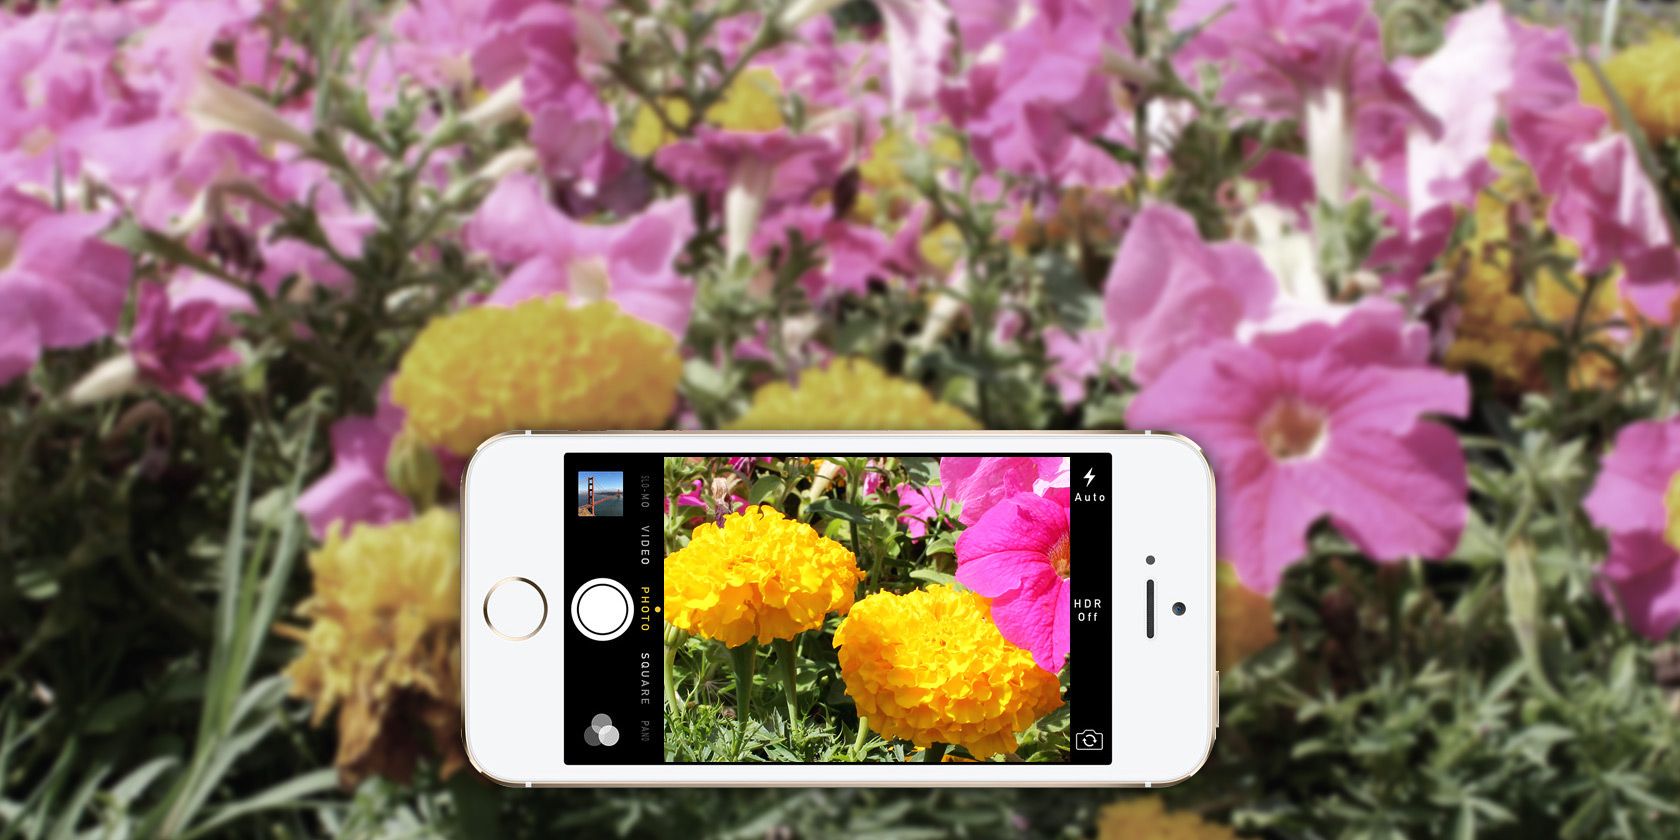 Apple Changed The Camera App In iOS7: Here’s What You Need To Know